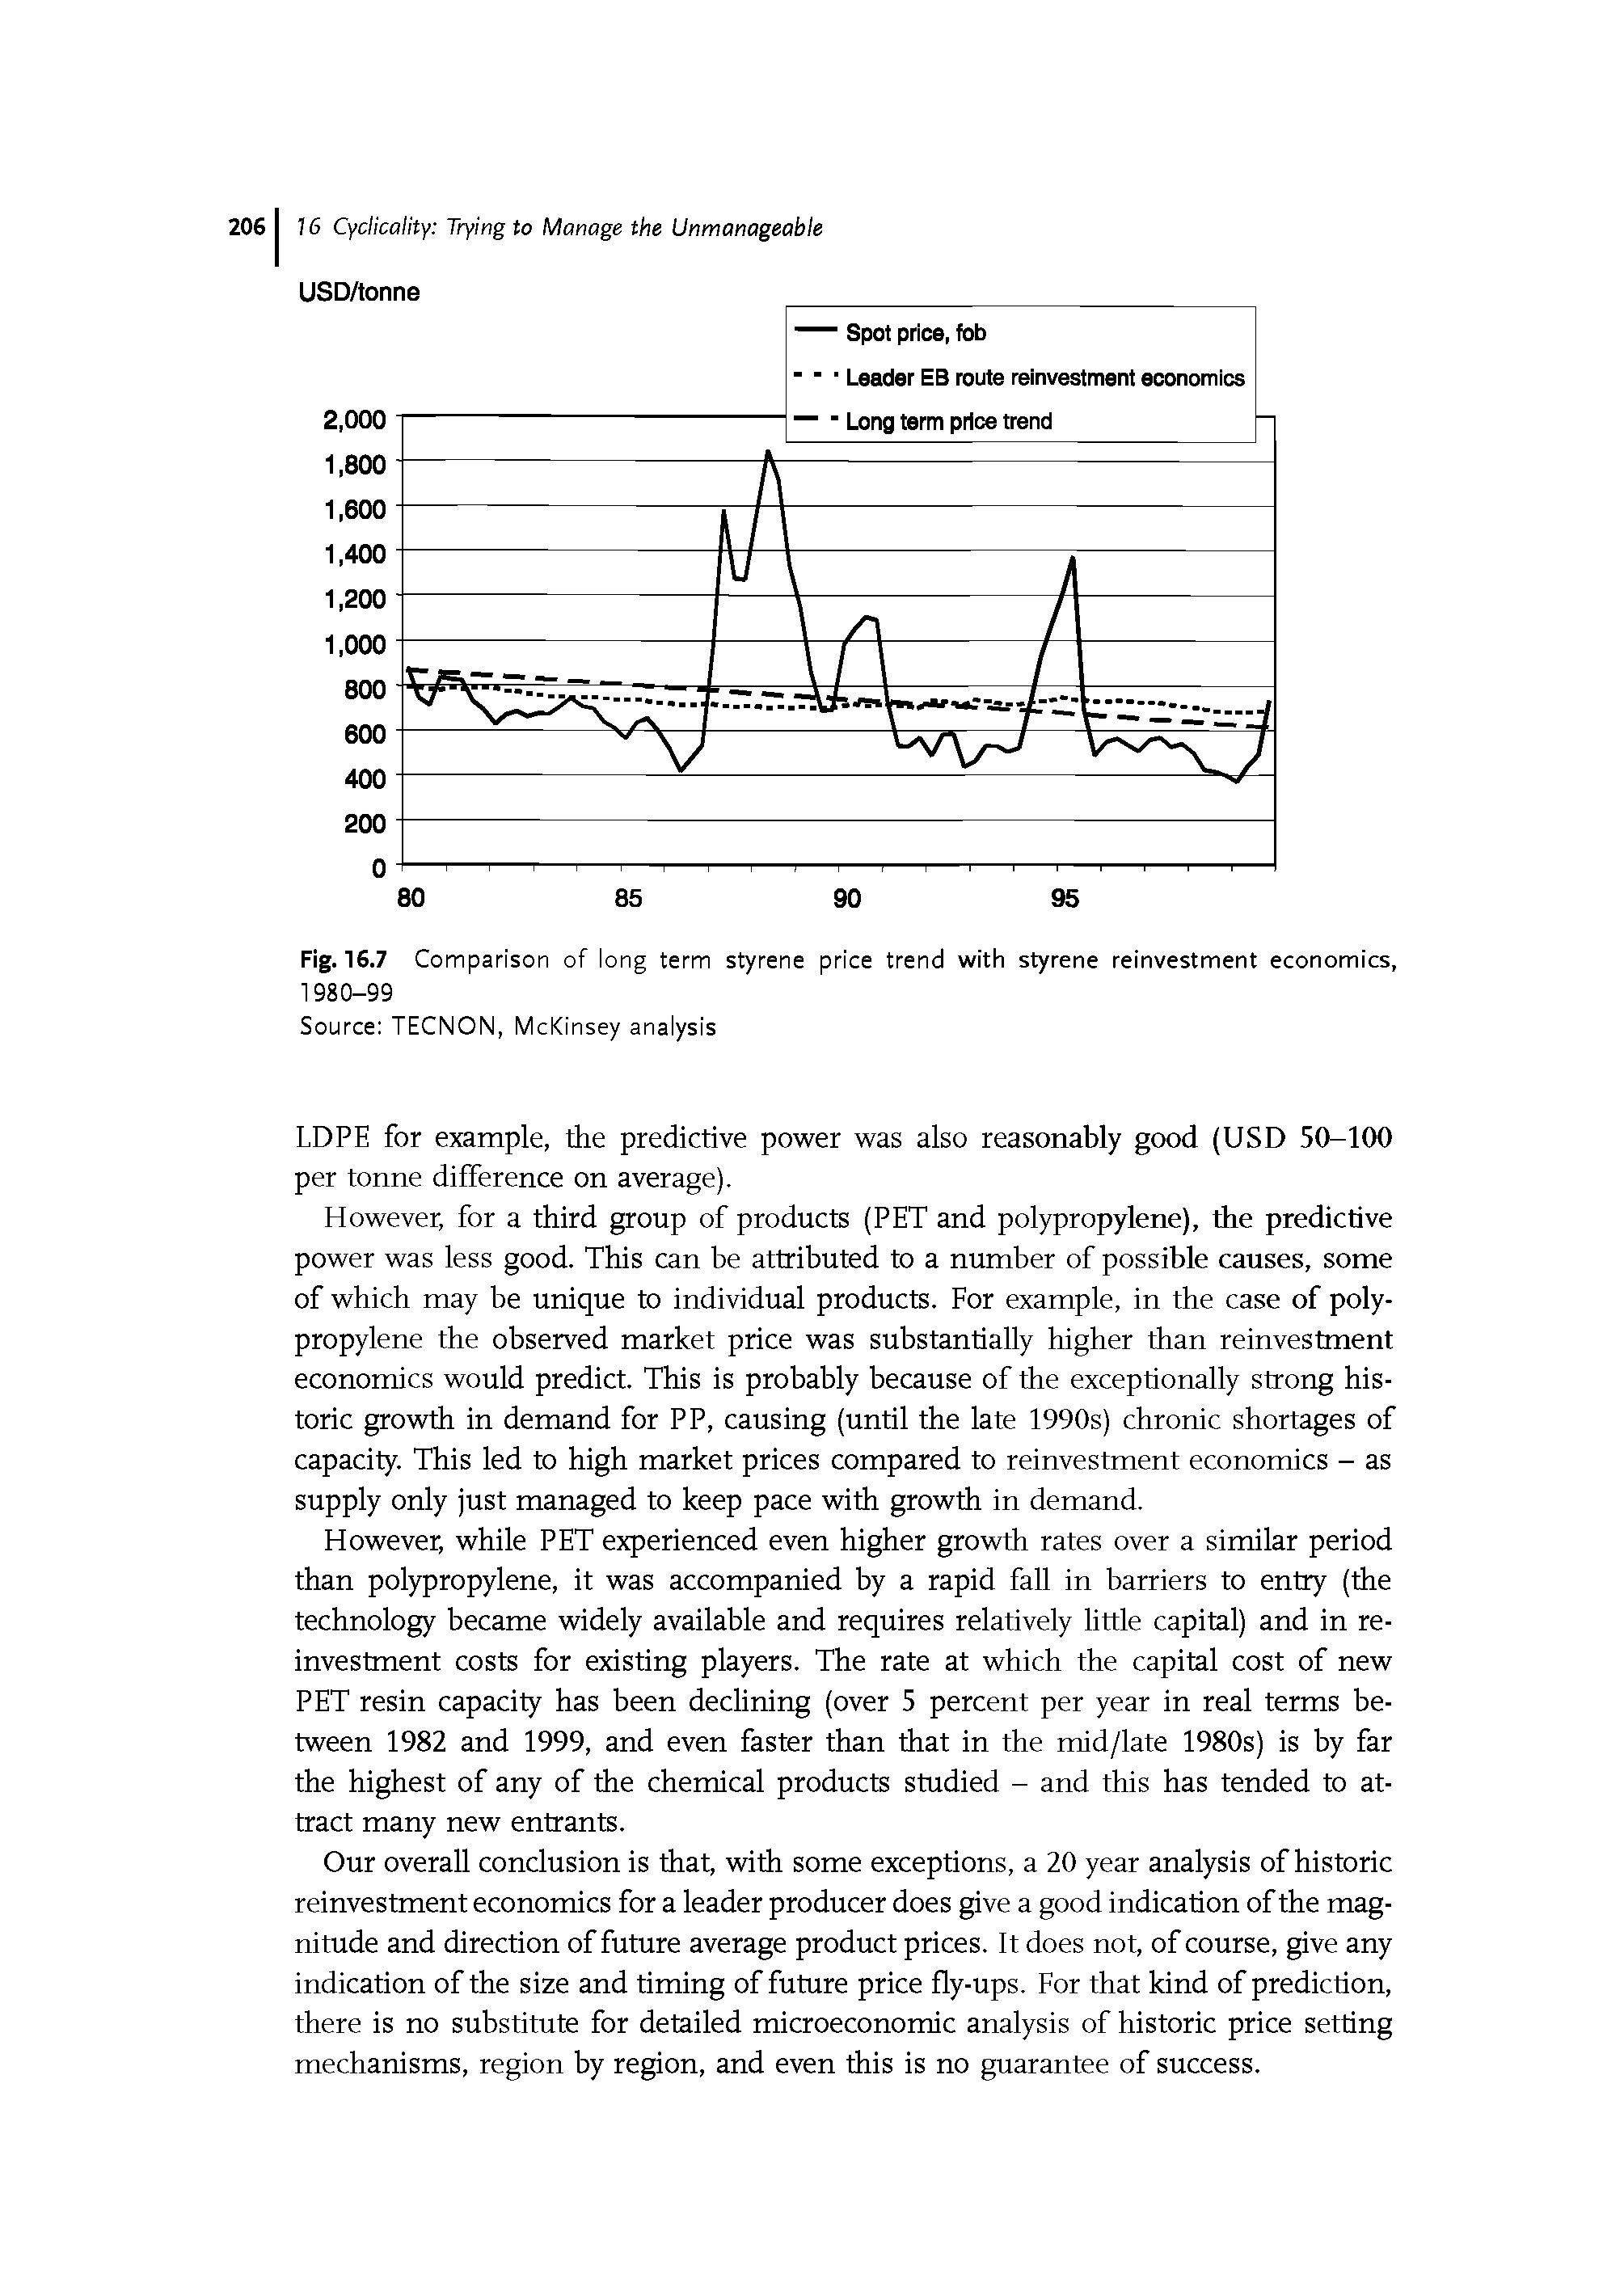 Fig. 16.7 Comparison of long term styrene price trend with styrene reinvestment economics, 1980-99...